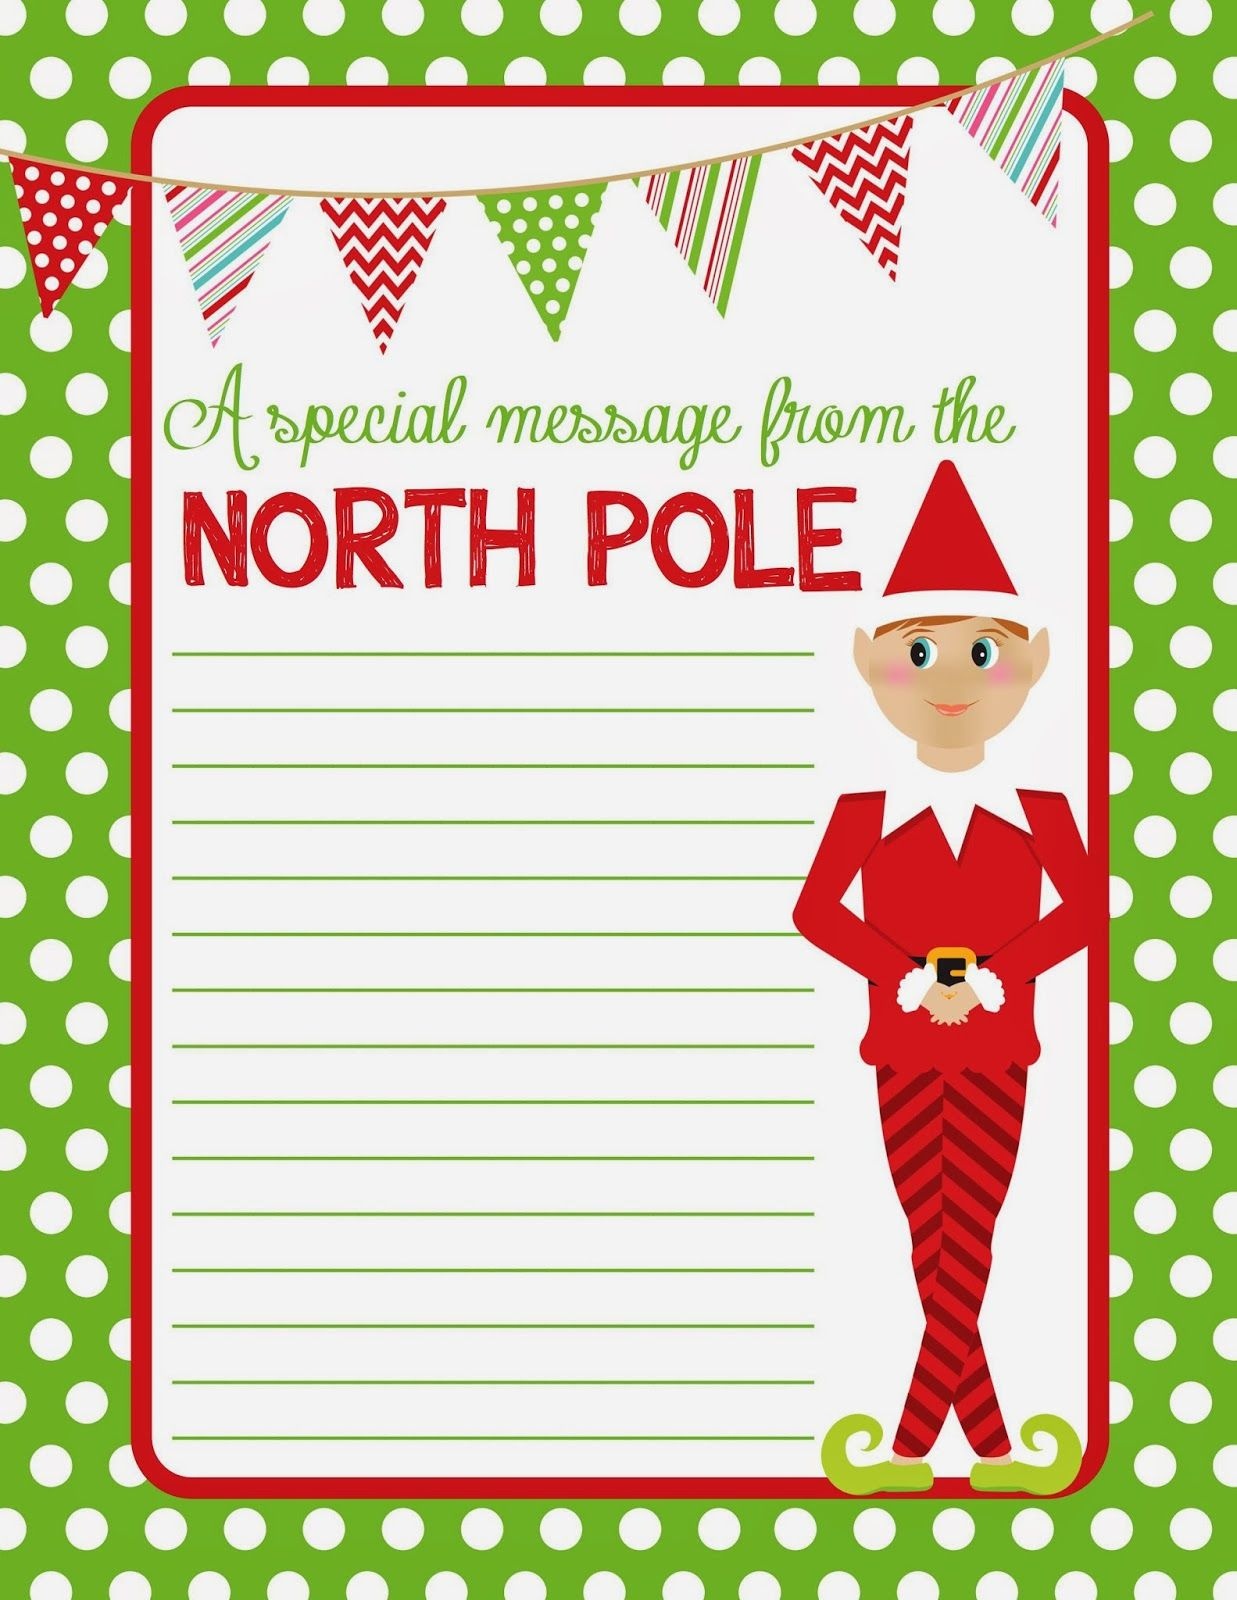 4 Best Images Of Elf On The Shelf Free Printable Christmas Paper - Free Printable Christmas Paper With Borders